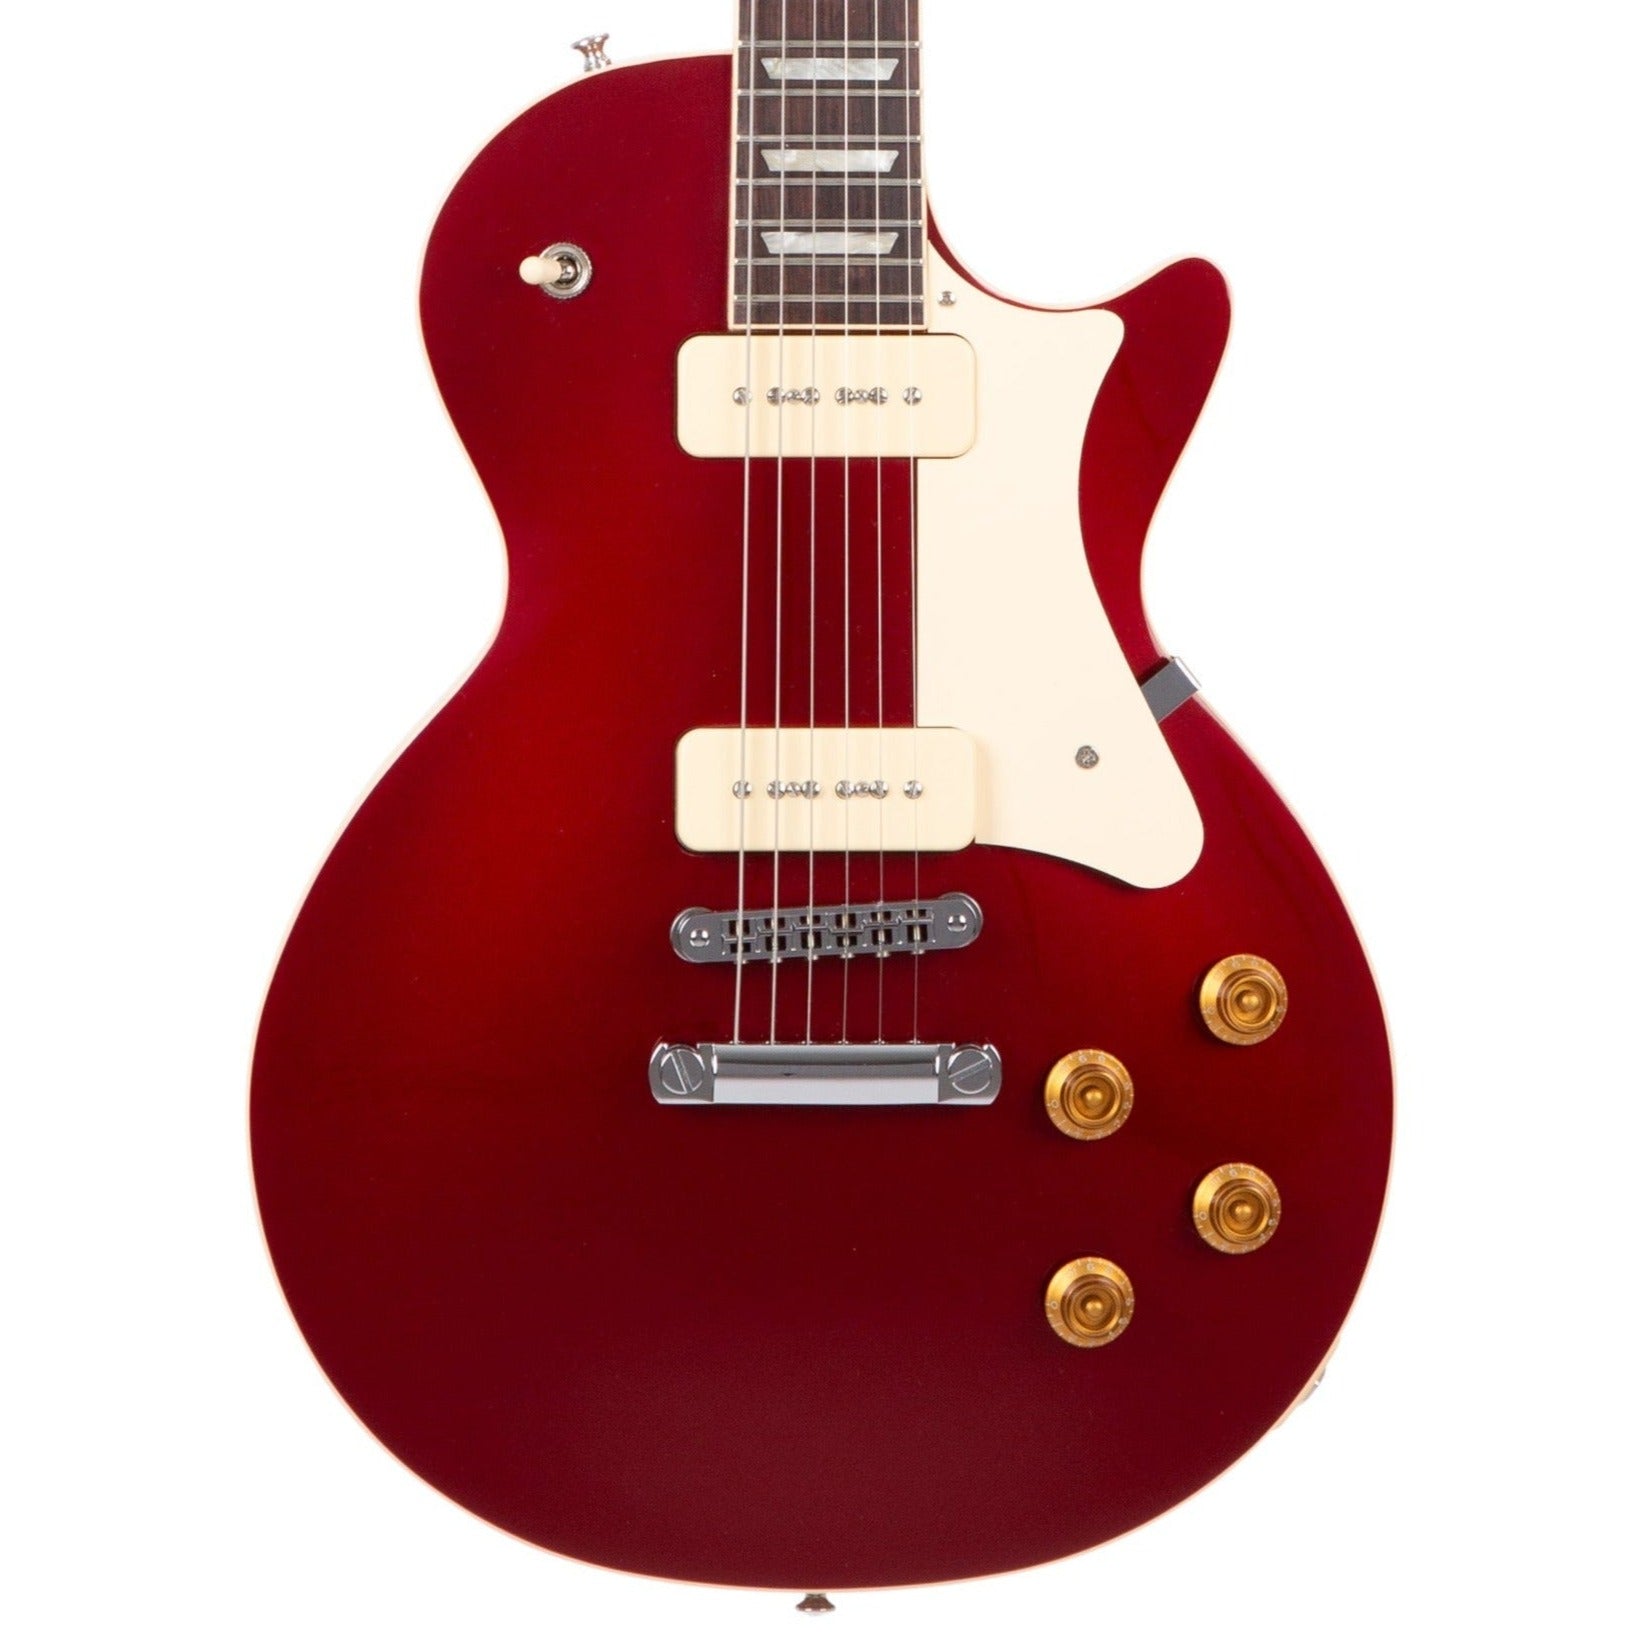 Heritage Standard Collection H-150 P90 Electric Guitar with Case, Cherry | Zoso Music Sdn Bhd